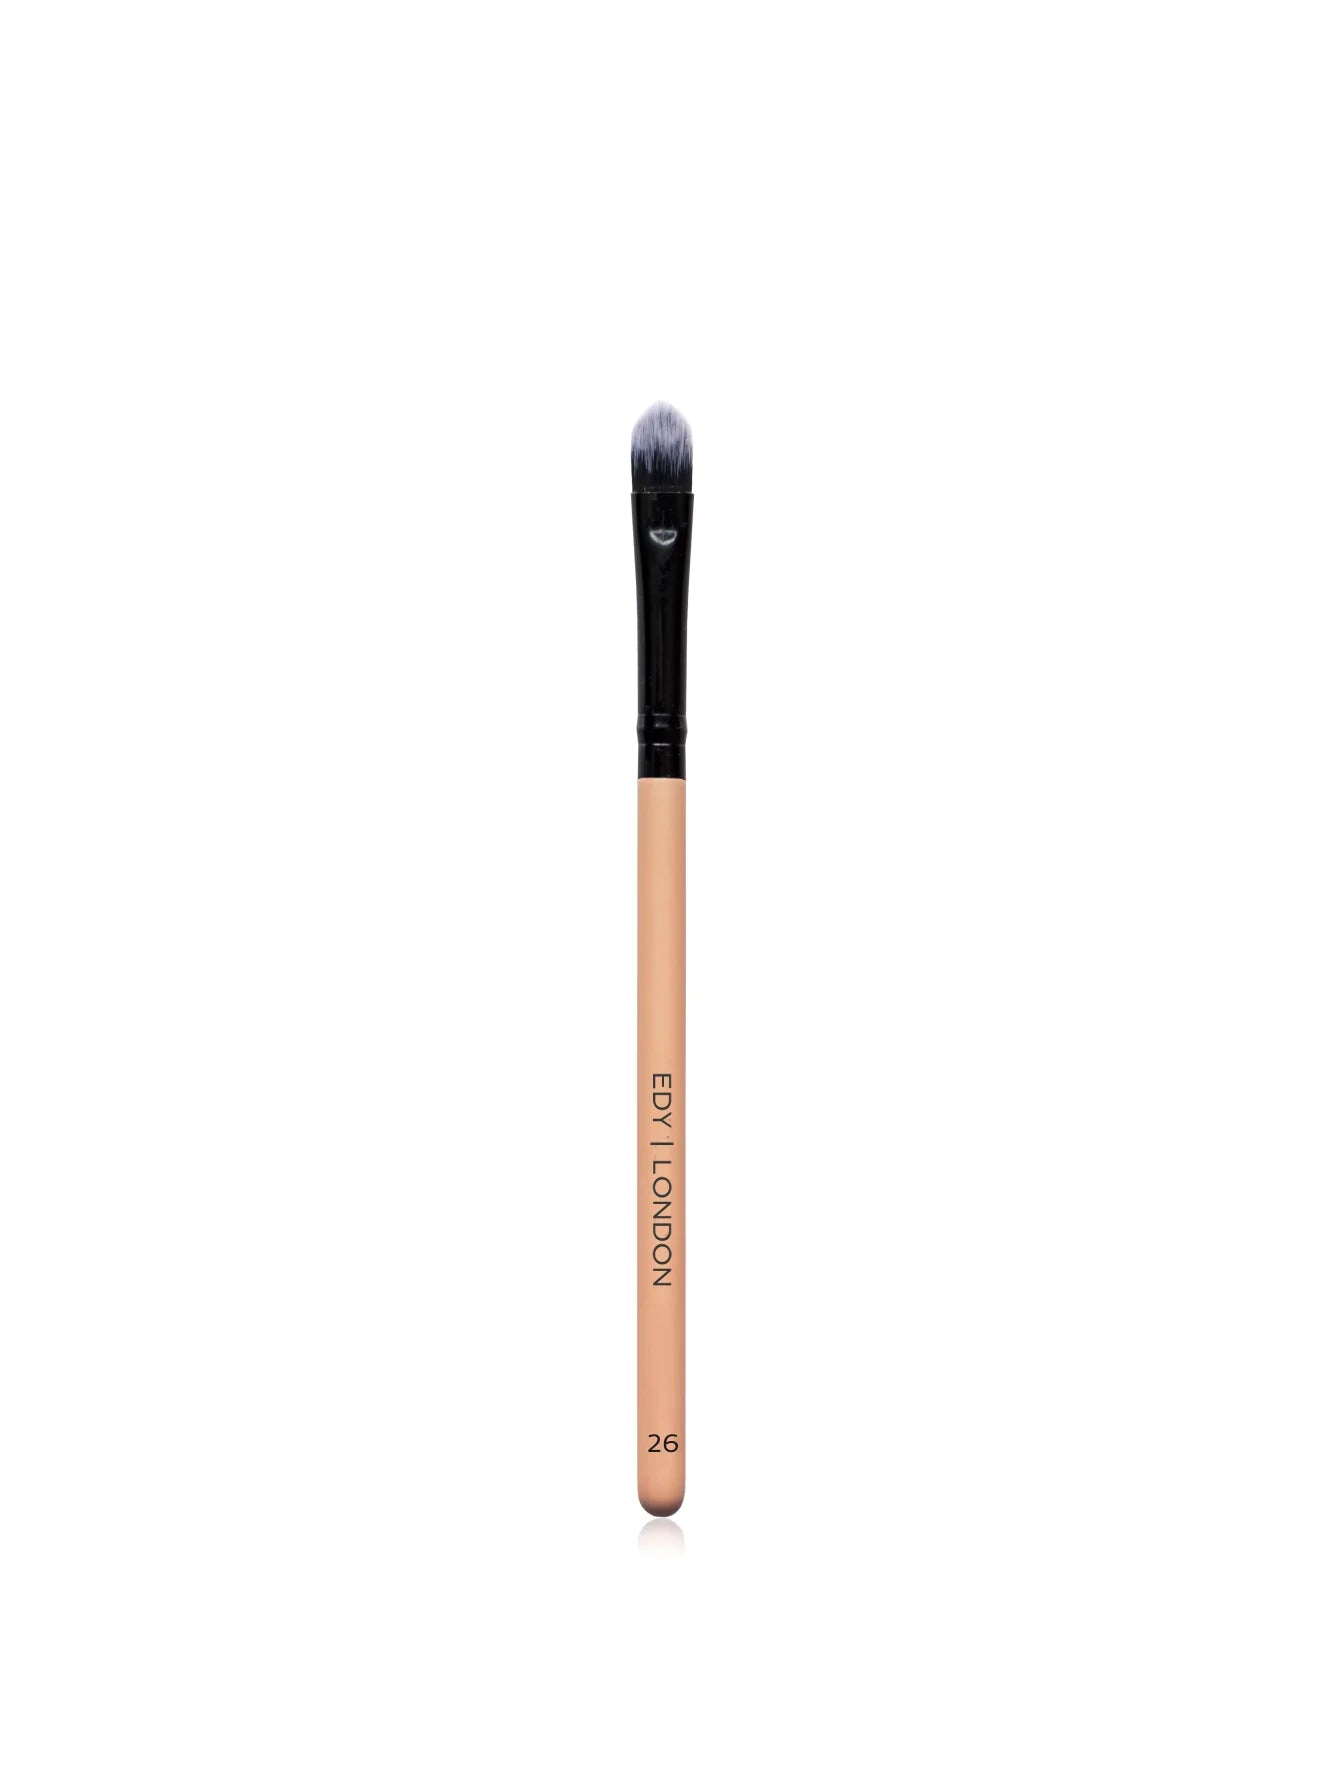 Concealer Brush 26 Make-up Brush EDY LONDON Pale Pink   - EDY LONDON PRODUCTS UK - The Best Makeup Brushes - shop.edy.london